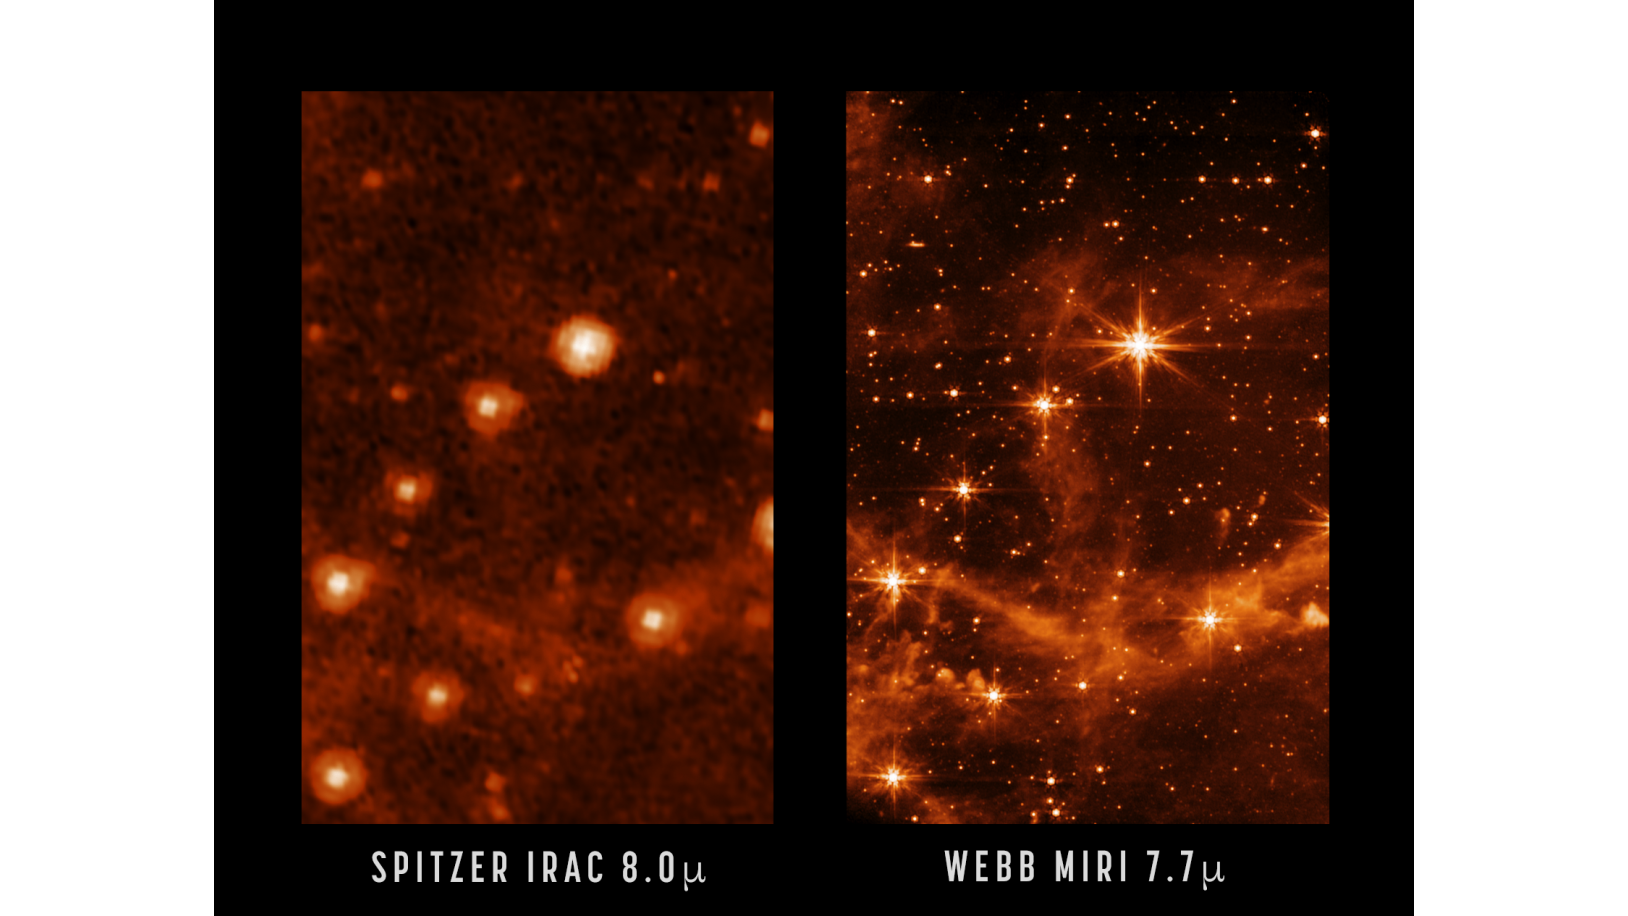 A comparison of views of the same part of the sky seen by NASA's retired Spitzer Space Telescope and the recently launched James Webb Space Telescope.